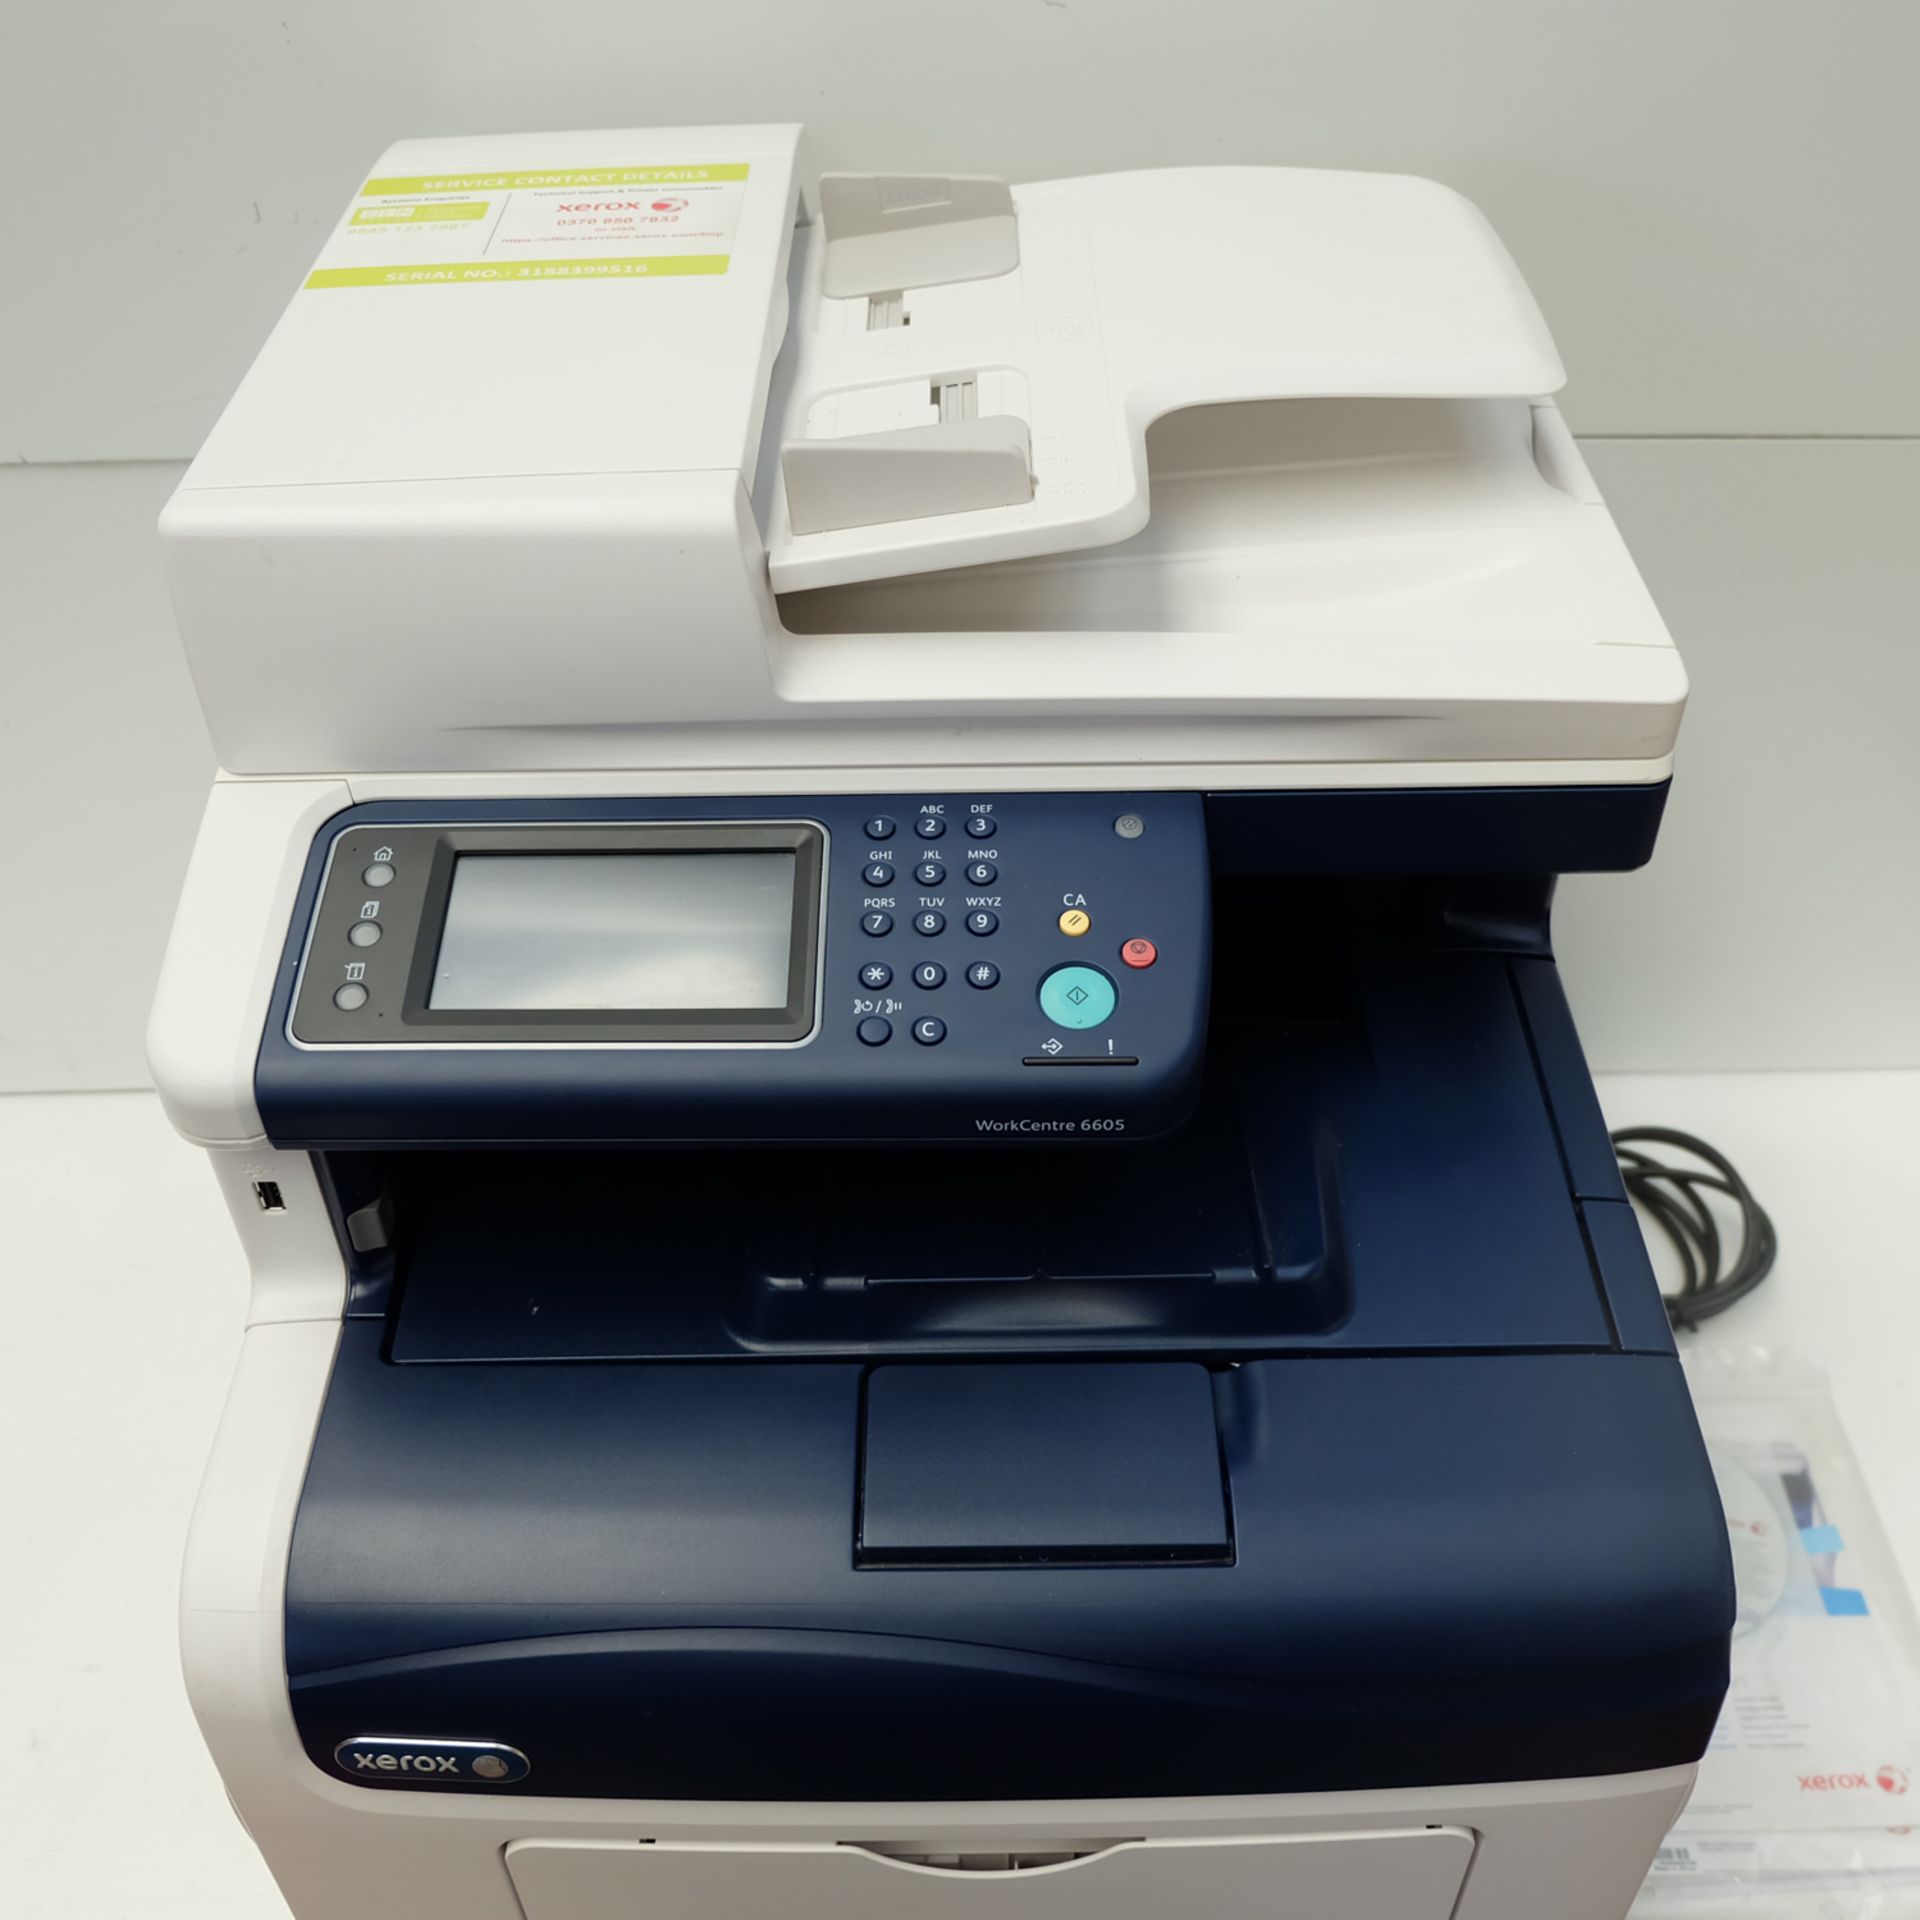 Xerox Printer/Scanner Model WorkCentre 6605. With Instruction Manual/CD. - Image 2 of 9